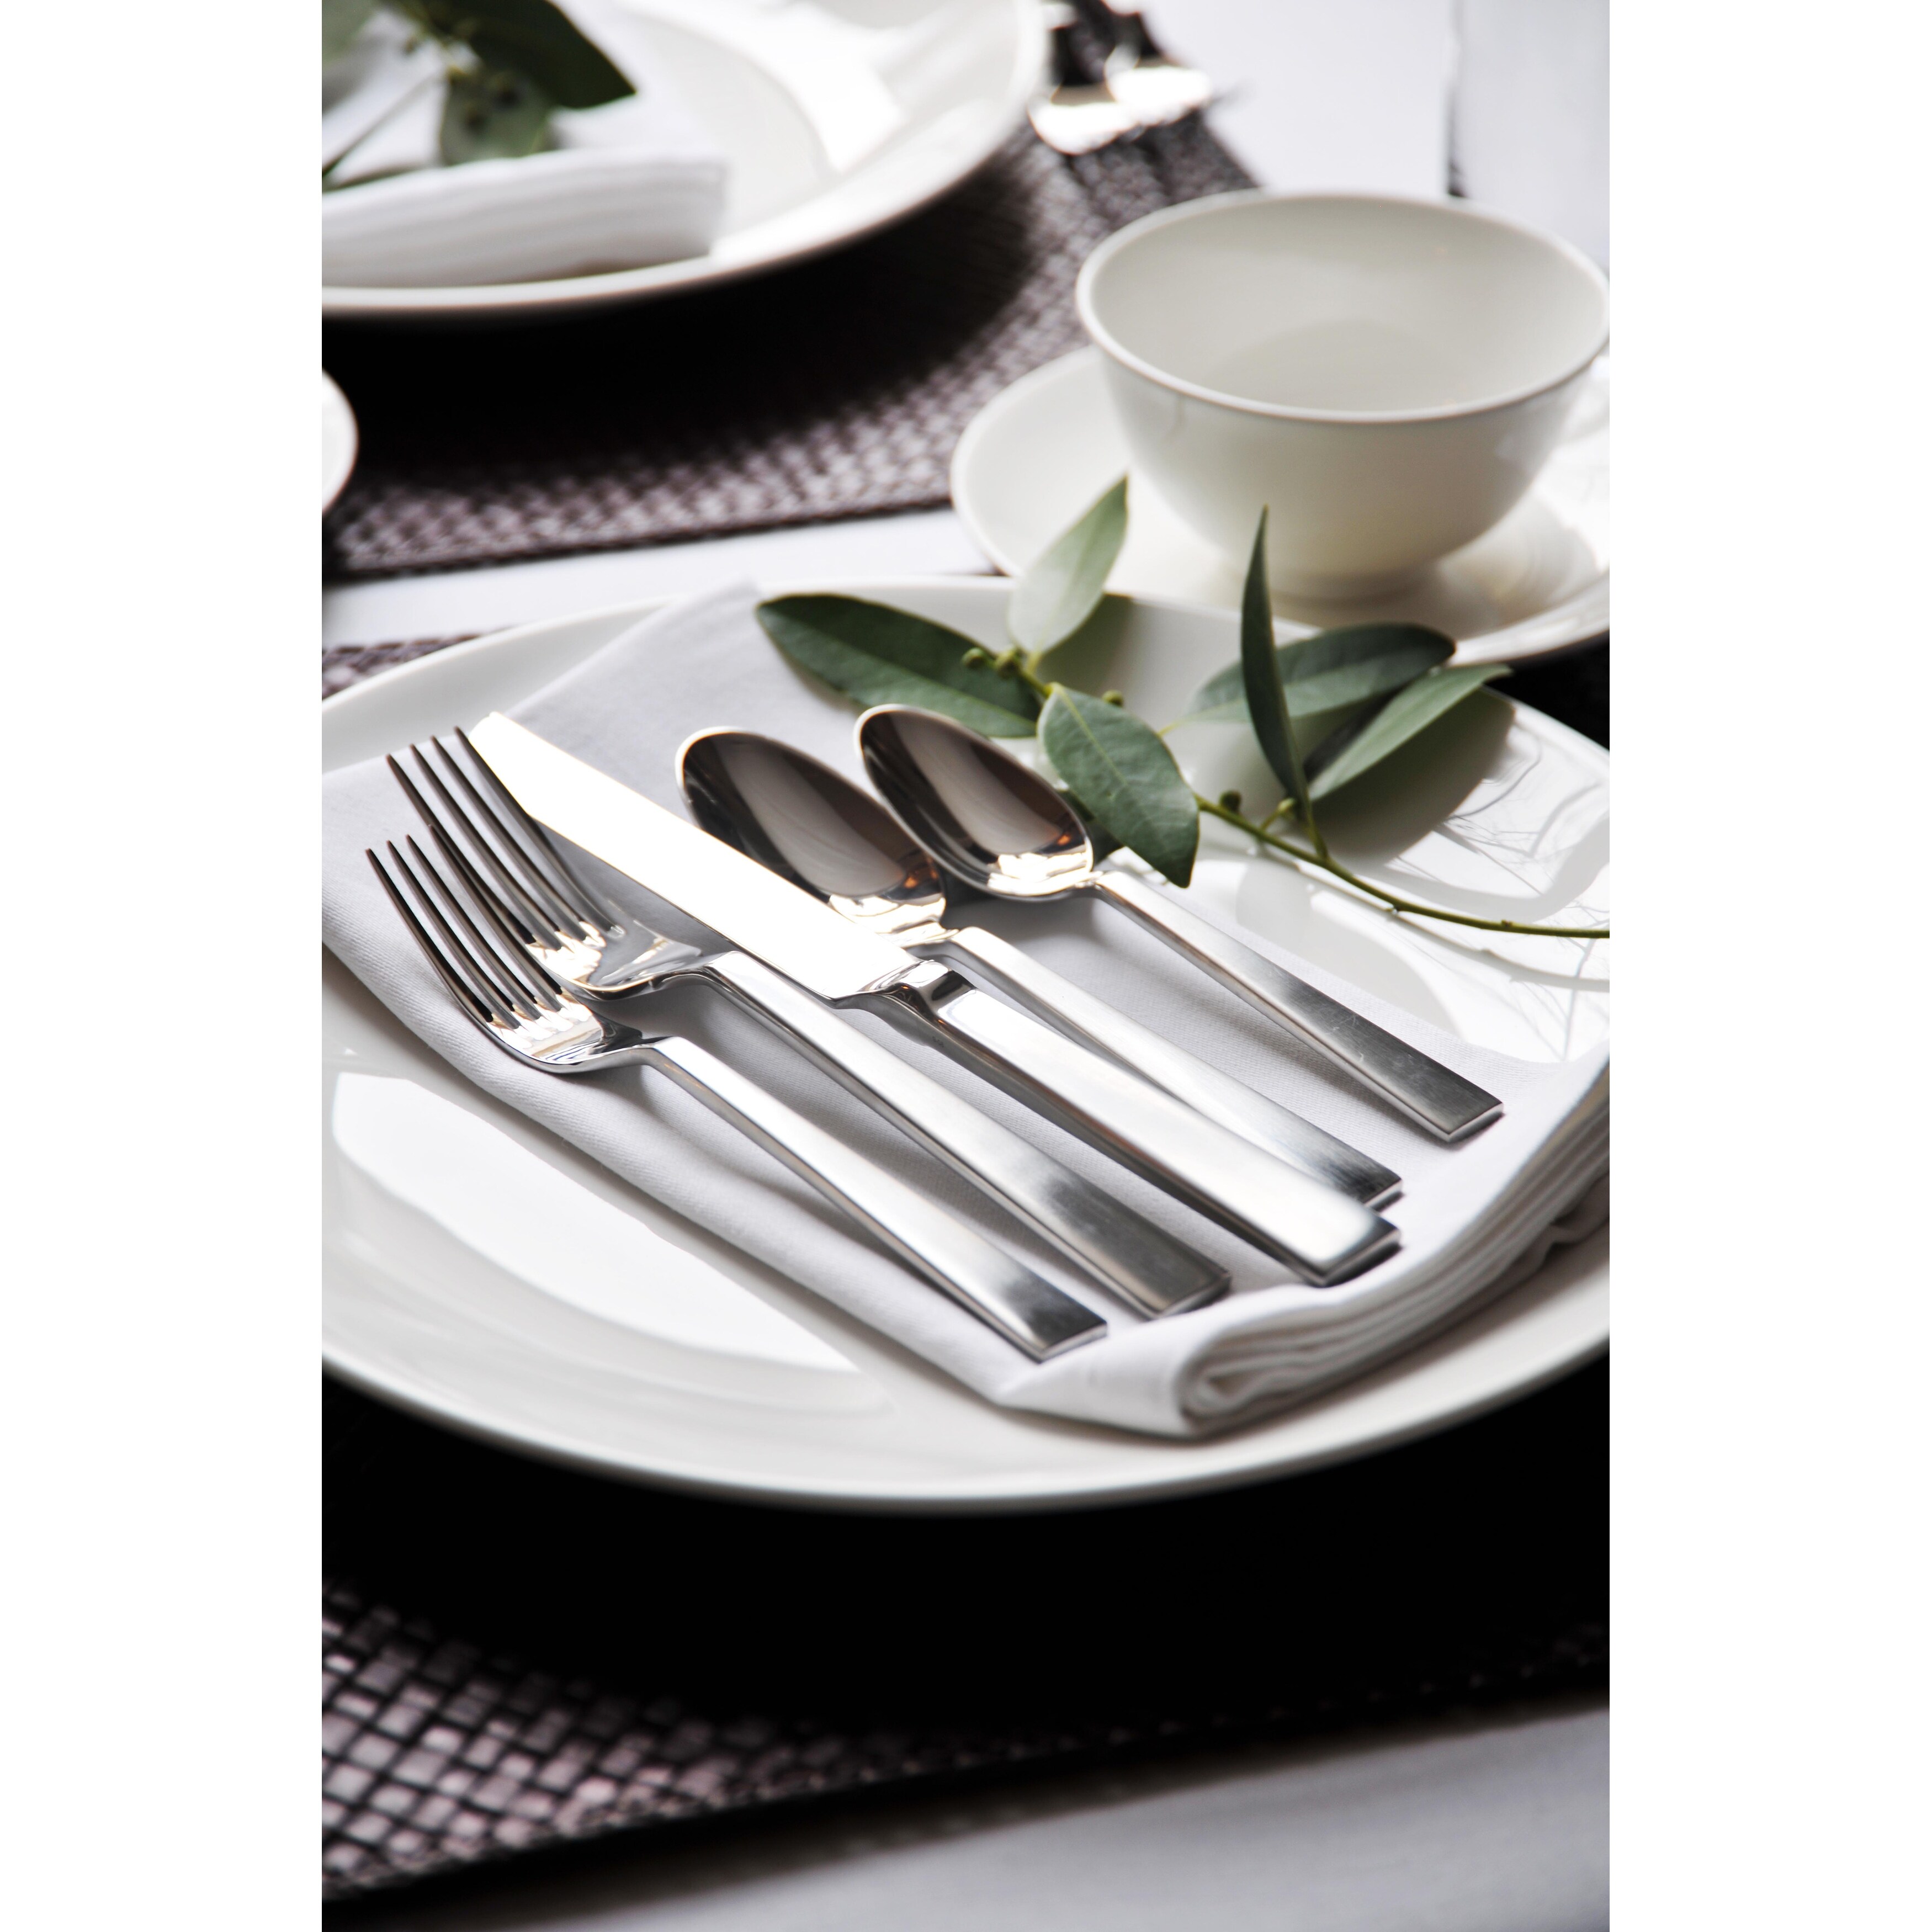 Sant' Andrea Stainless Steel Fulcrum Pierced Tablespoons (Set of 12) by  Oneida - Bed Bath & Beyond - 32644734